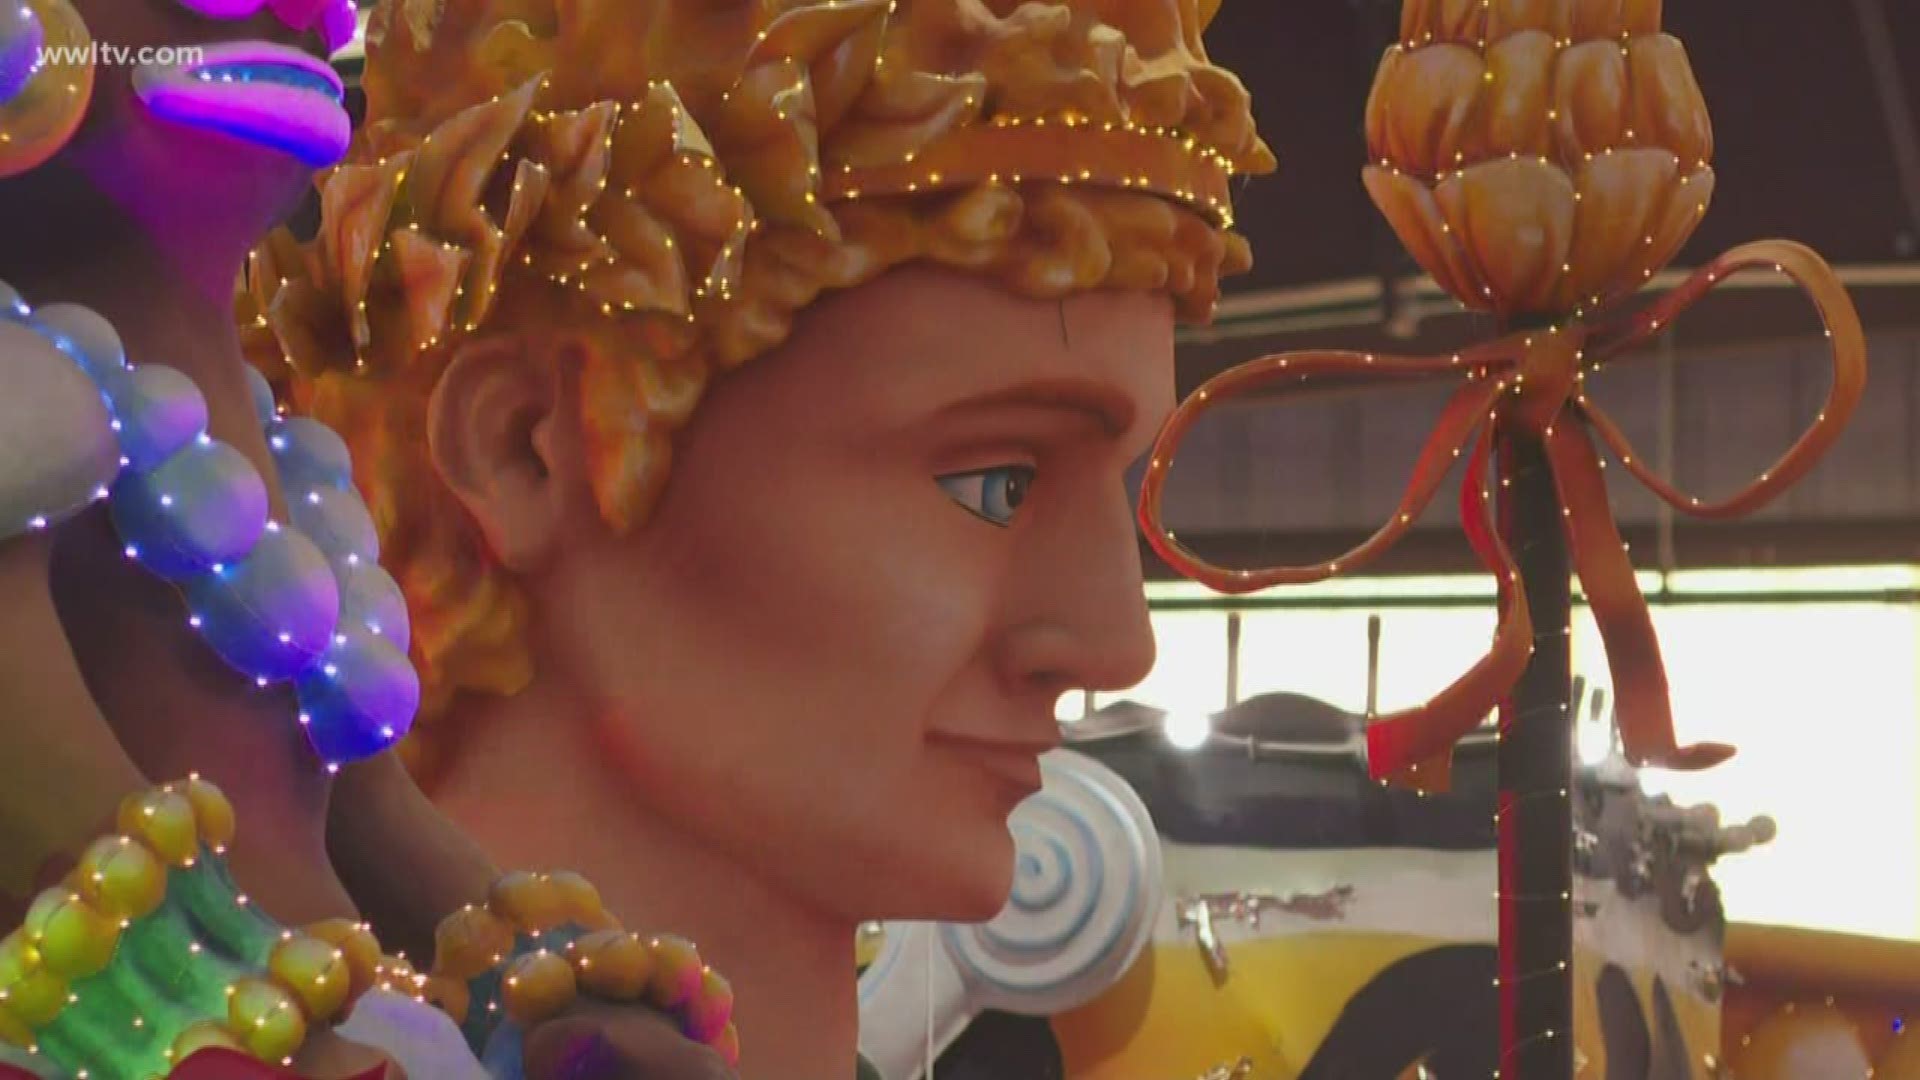 The Krewe of Endymion held an open house on Saturday (Feb. 8) to preview its 2020 parade.